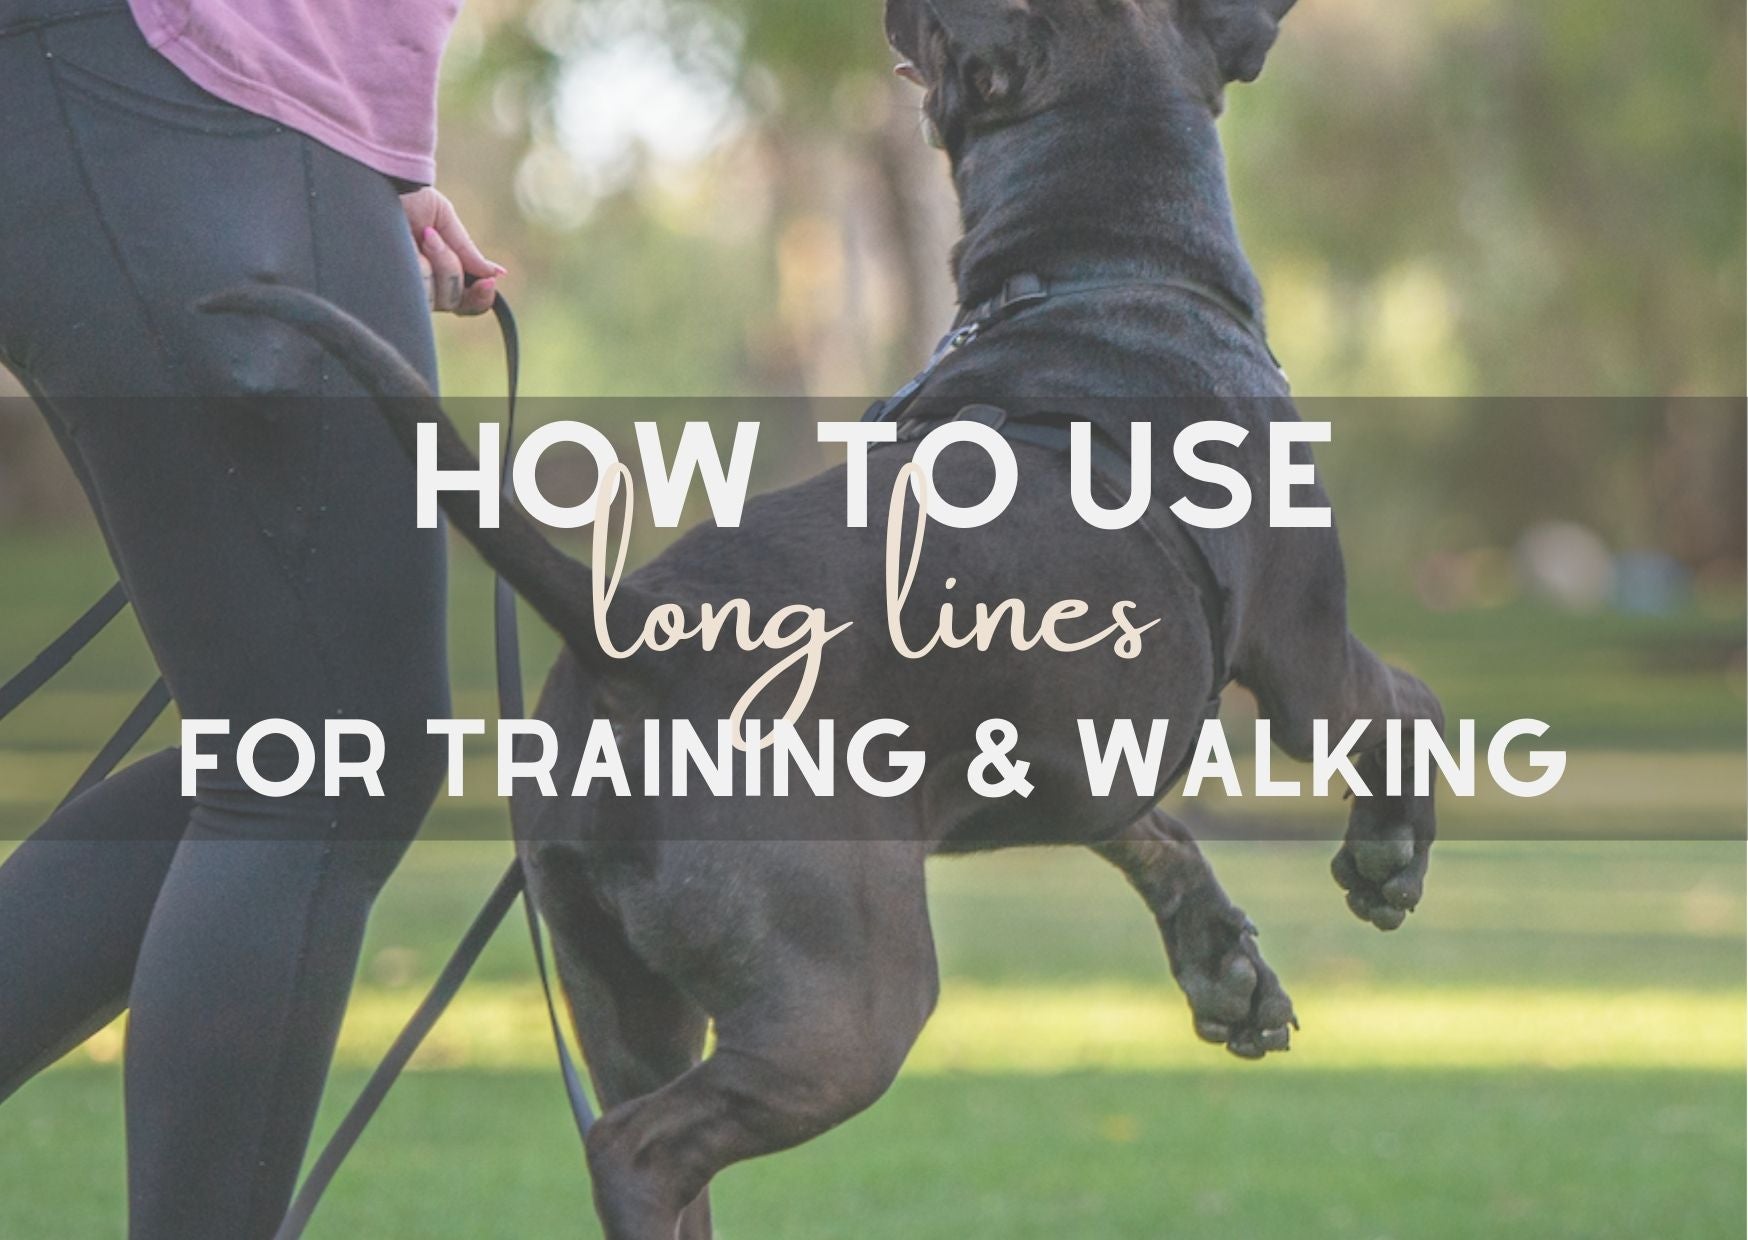 How to use a long line for dog training and walking